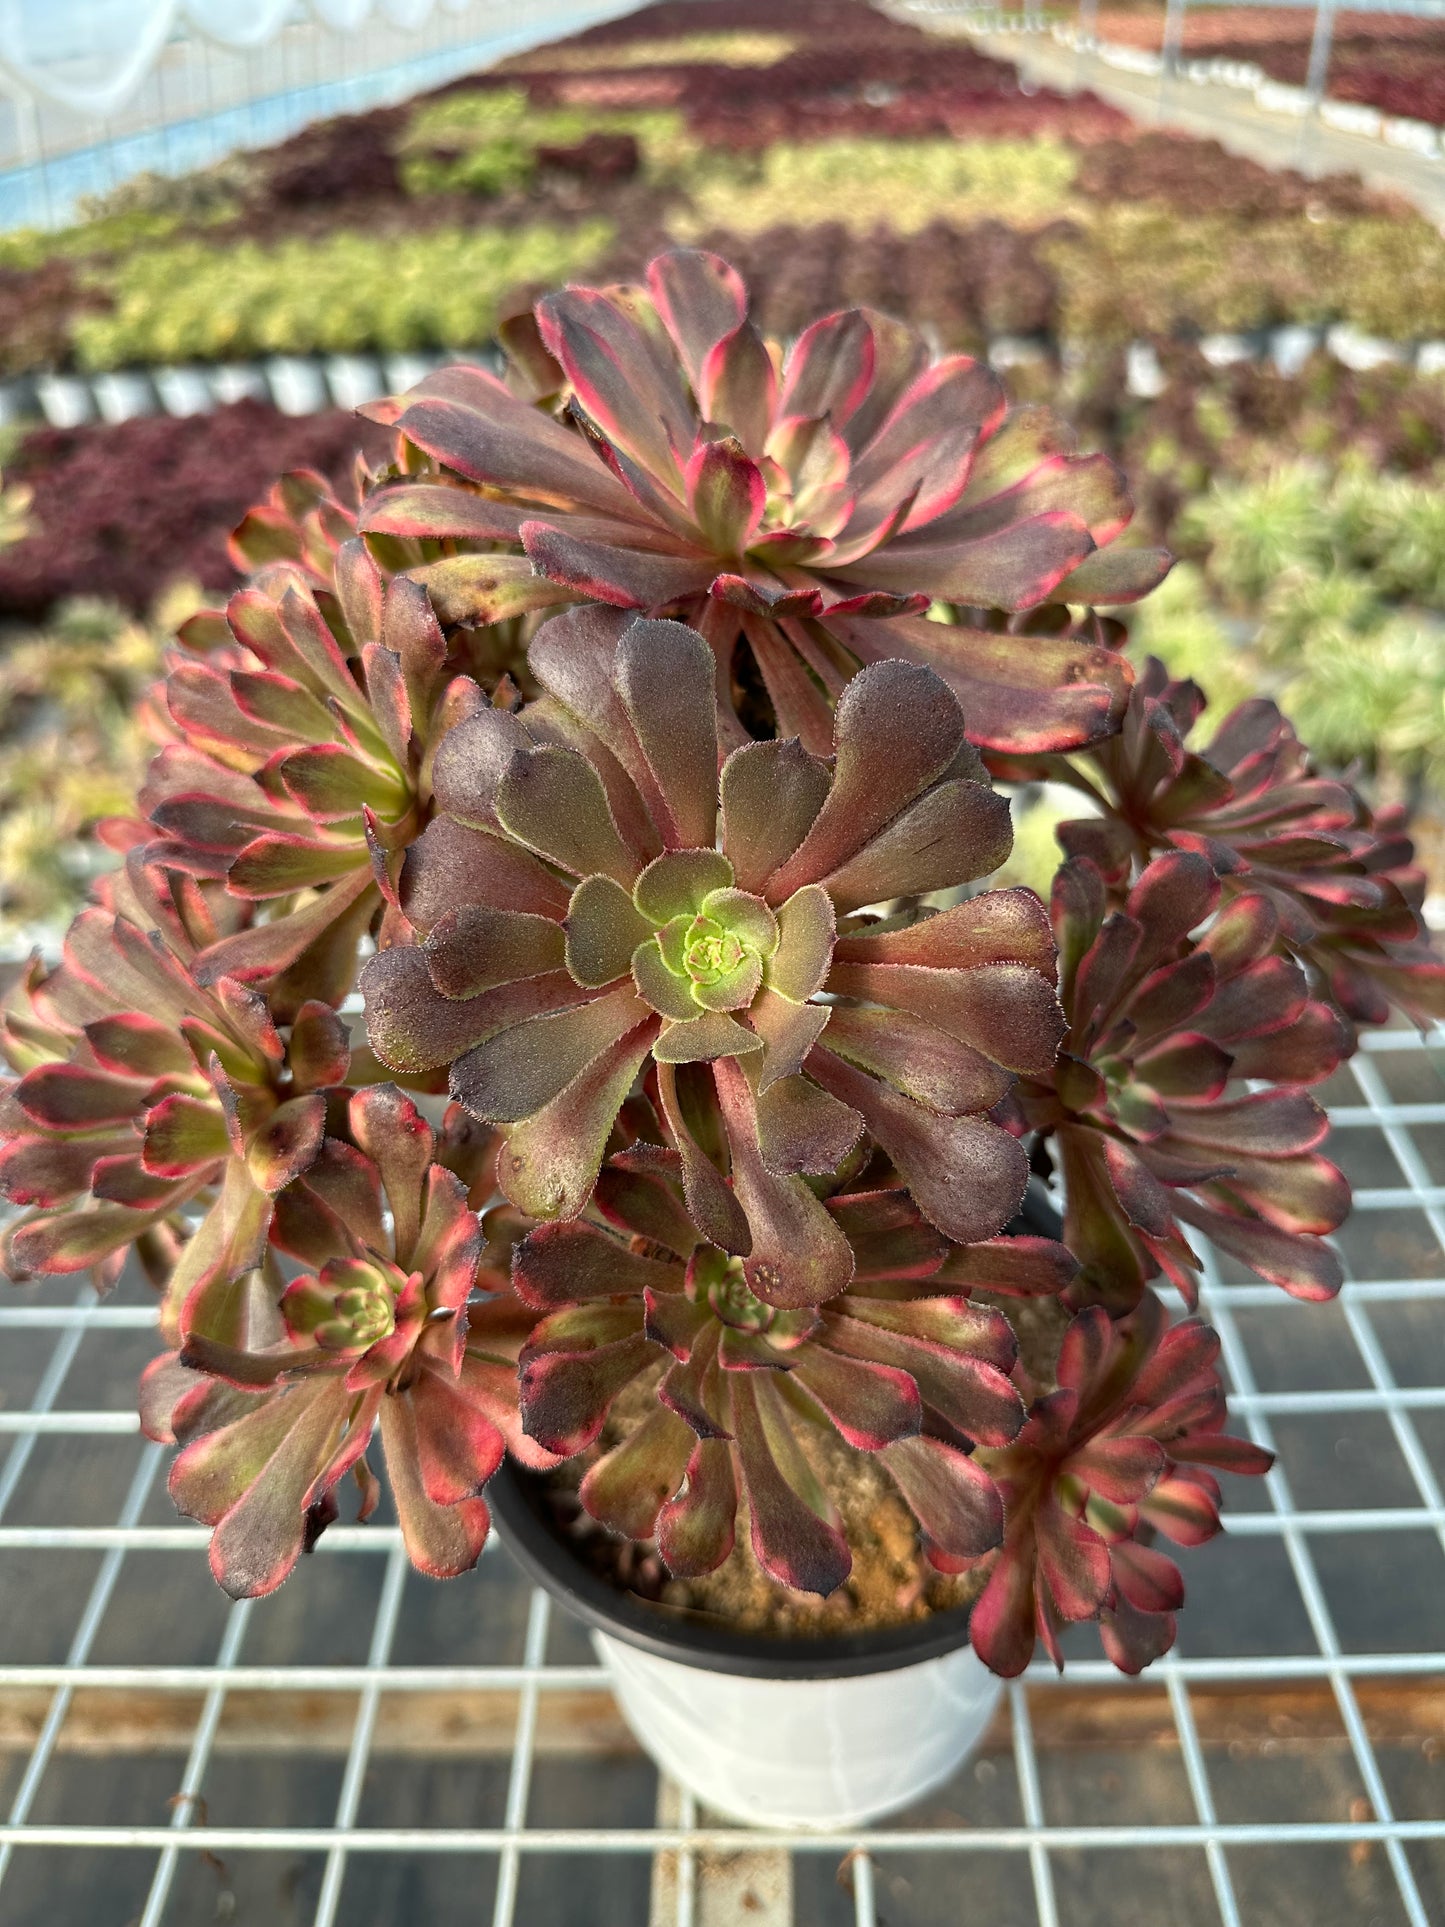 Red diamond cluster20-30cm Old pile/ 10-20 heads/ Aeonium cluster / Variegated Natural Live Plants Succulents